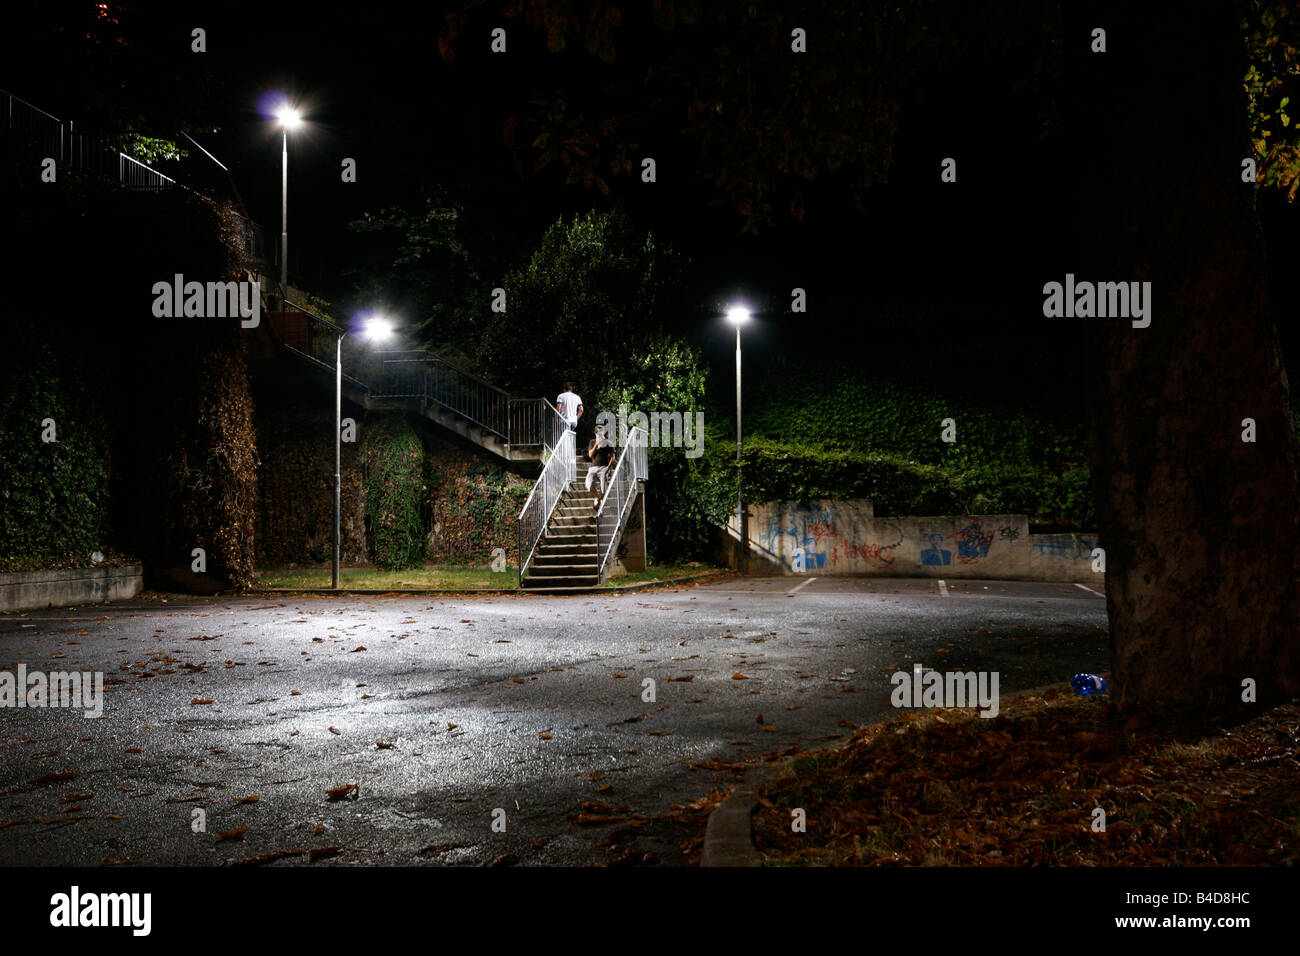 Empty car parking with two men walking in the night.  Moncalieri, Turin, Italy. Stock Photo